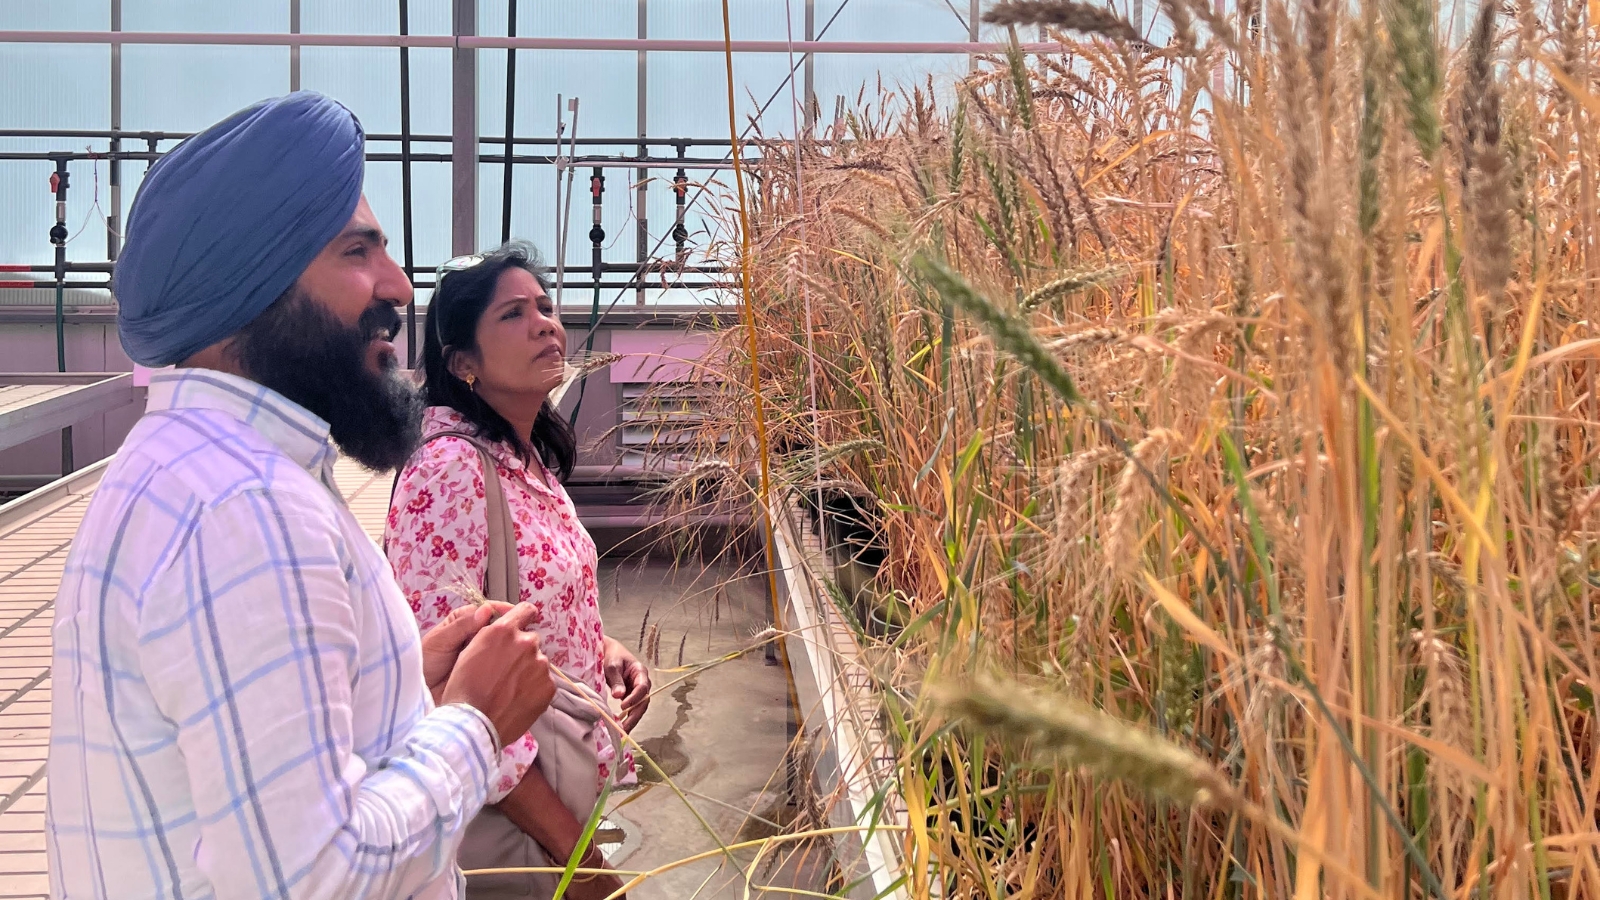 Meet Gurcharn Singh Brar, assistant professor and wheat breeder at University of Alberta and an affiliate assistant professor (Plant Science) at the University of British Columbia. 